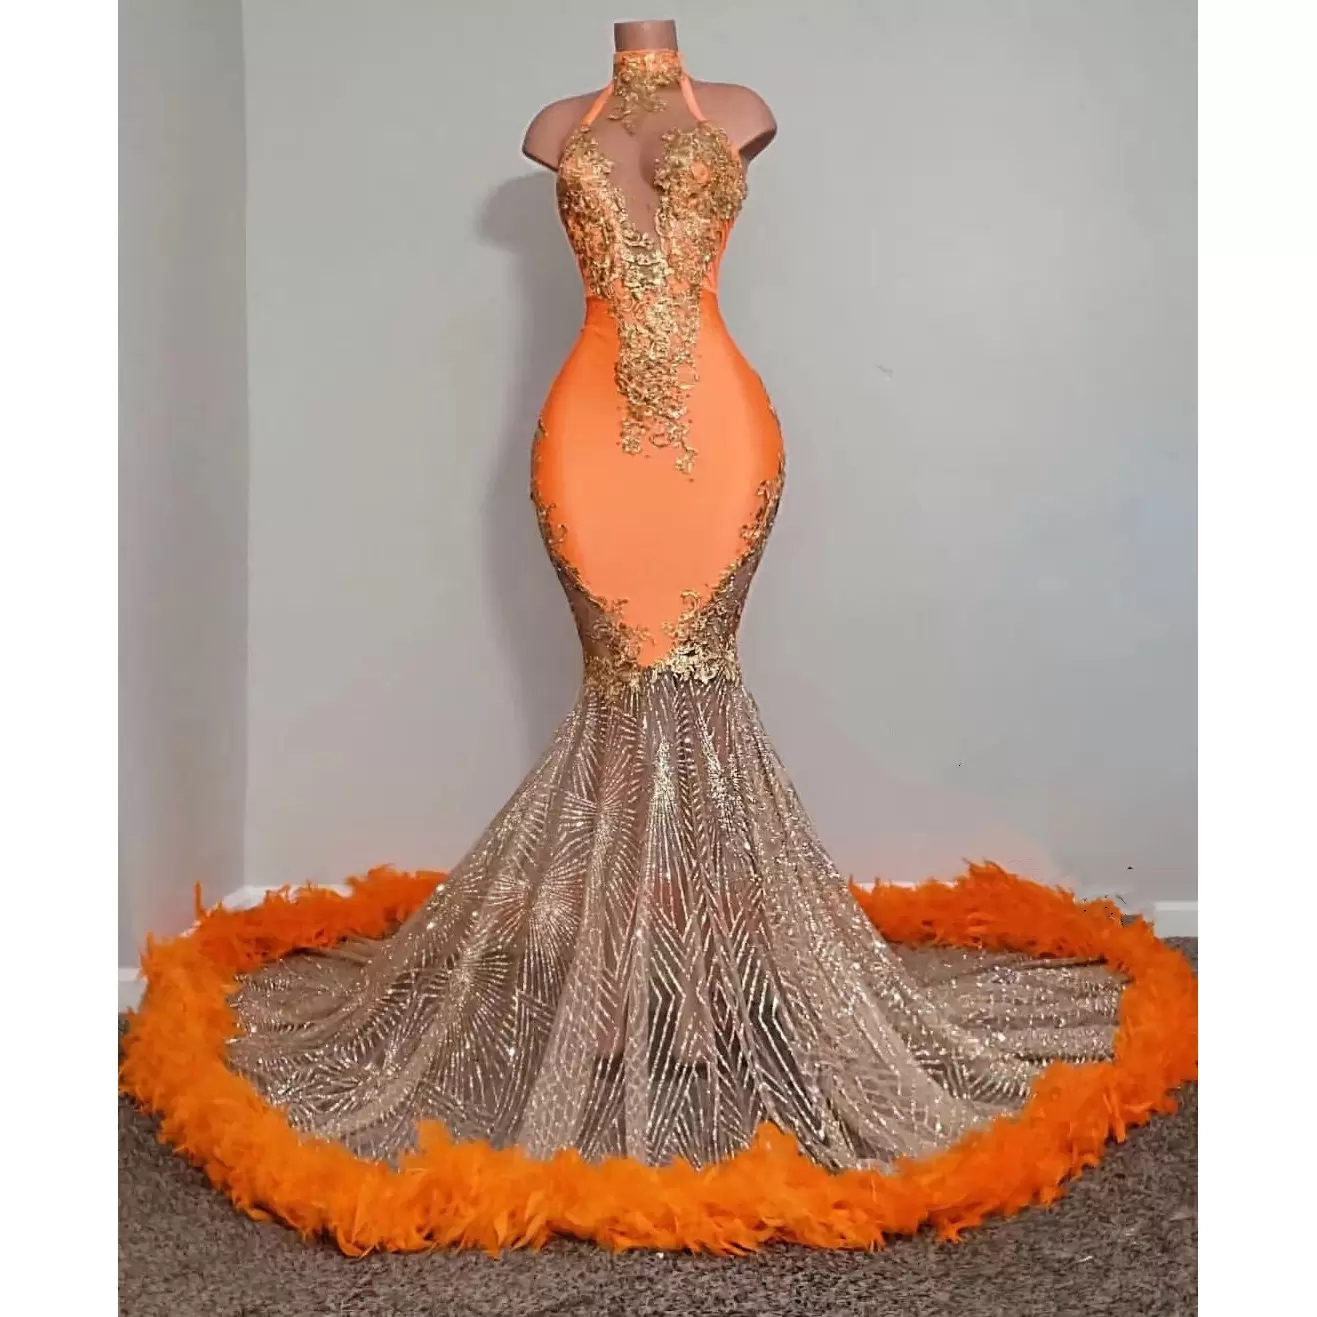 

Black Girls Orange Mermaid Prom Dresses 2022 Satin Beading Sequined High Neck Feathers Luxury Skirt Evening Party Formal Gowns For Women C0527ZZ7